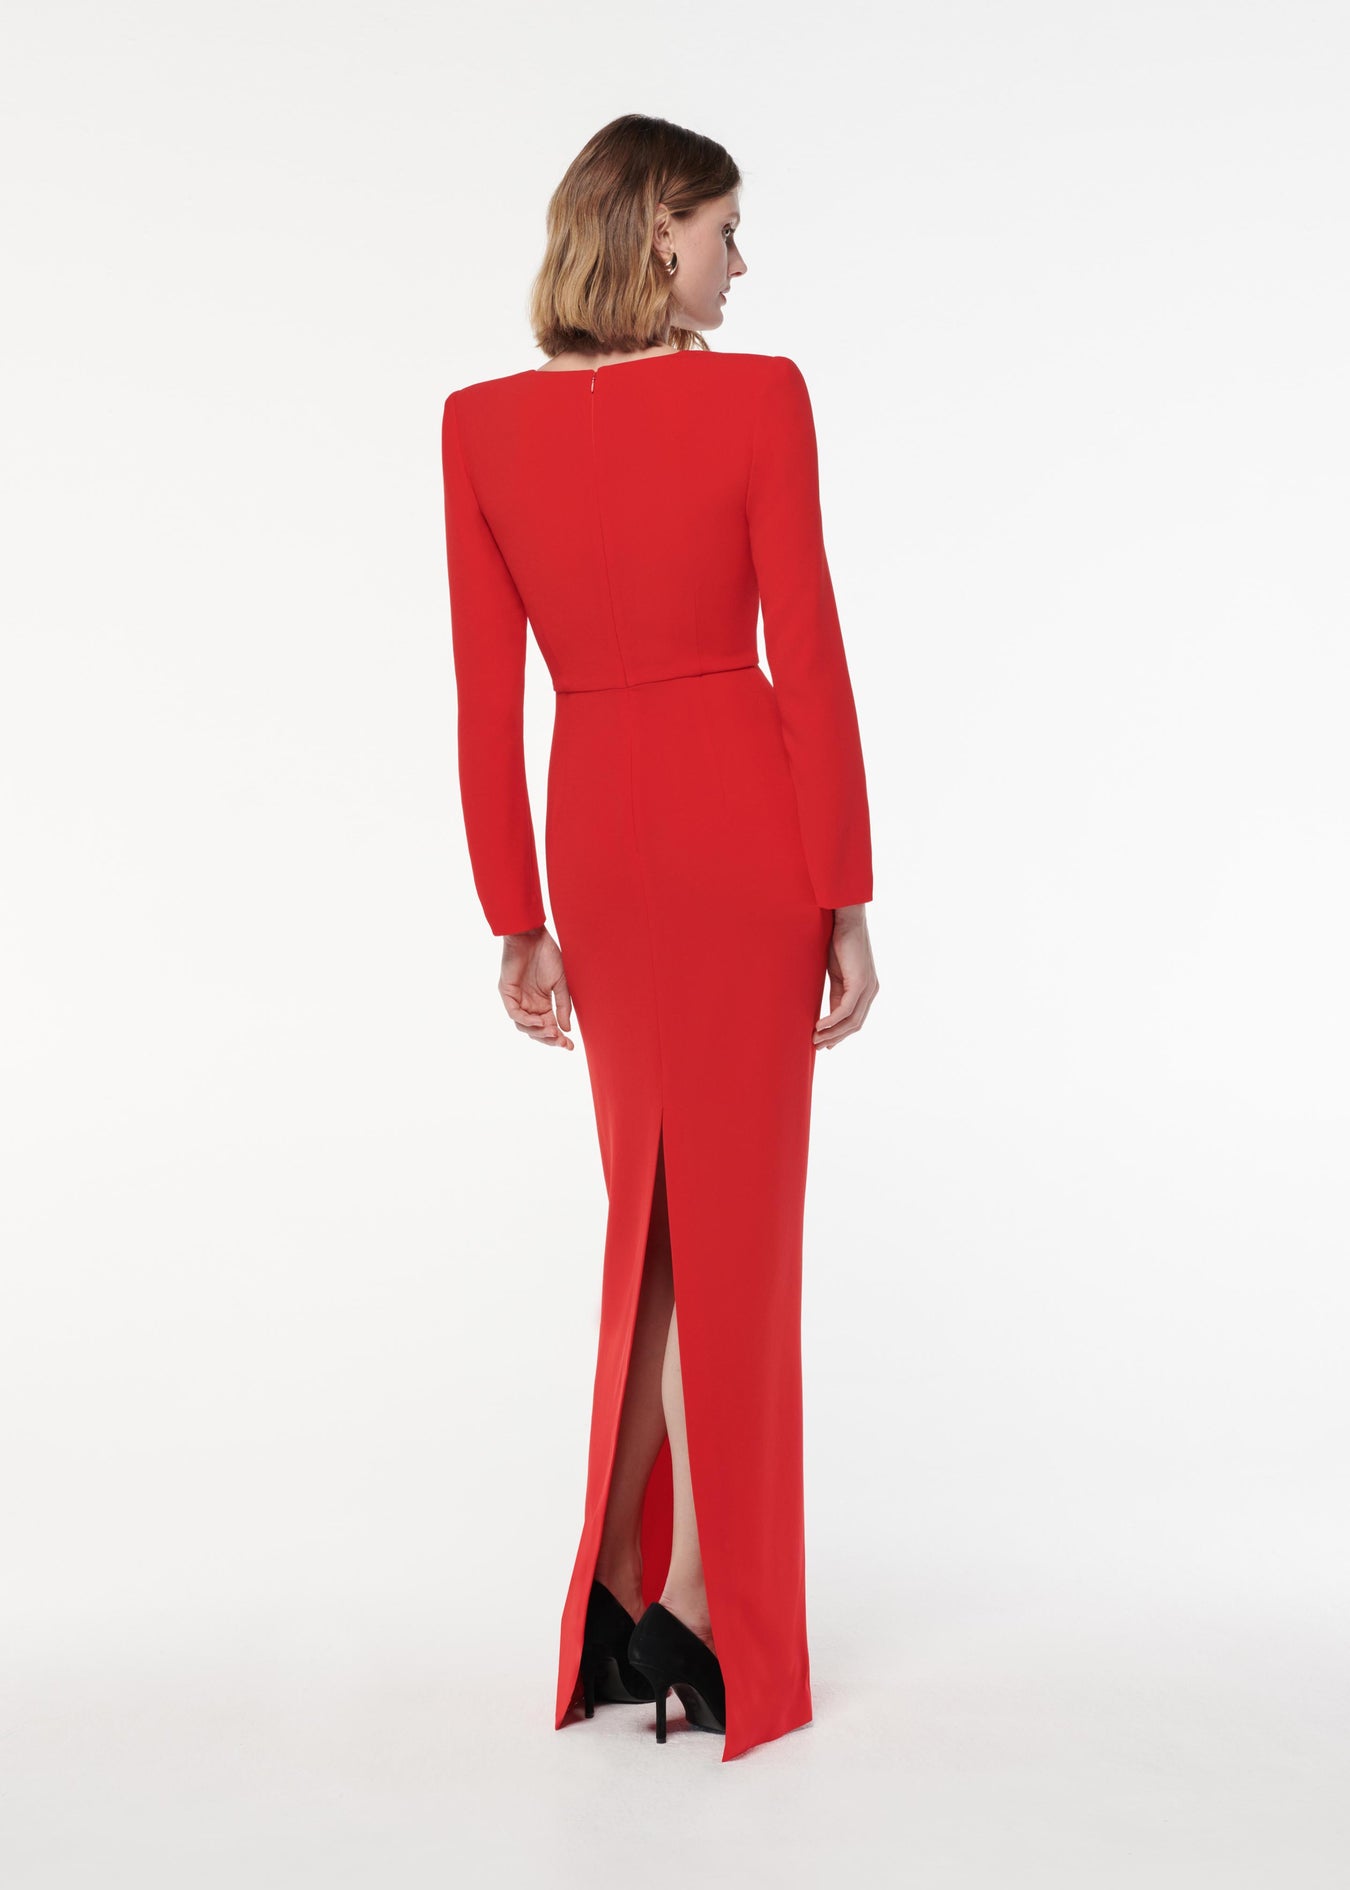 A photograph of a woman wearing a Long Sleeve Light Cady Maxi Dress in Red